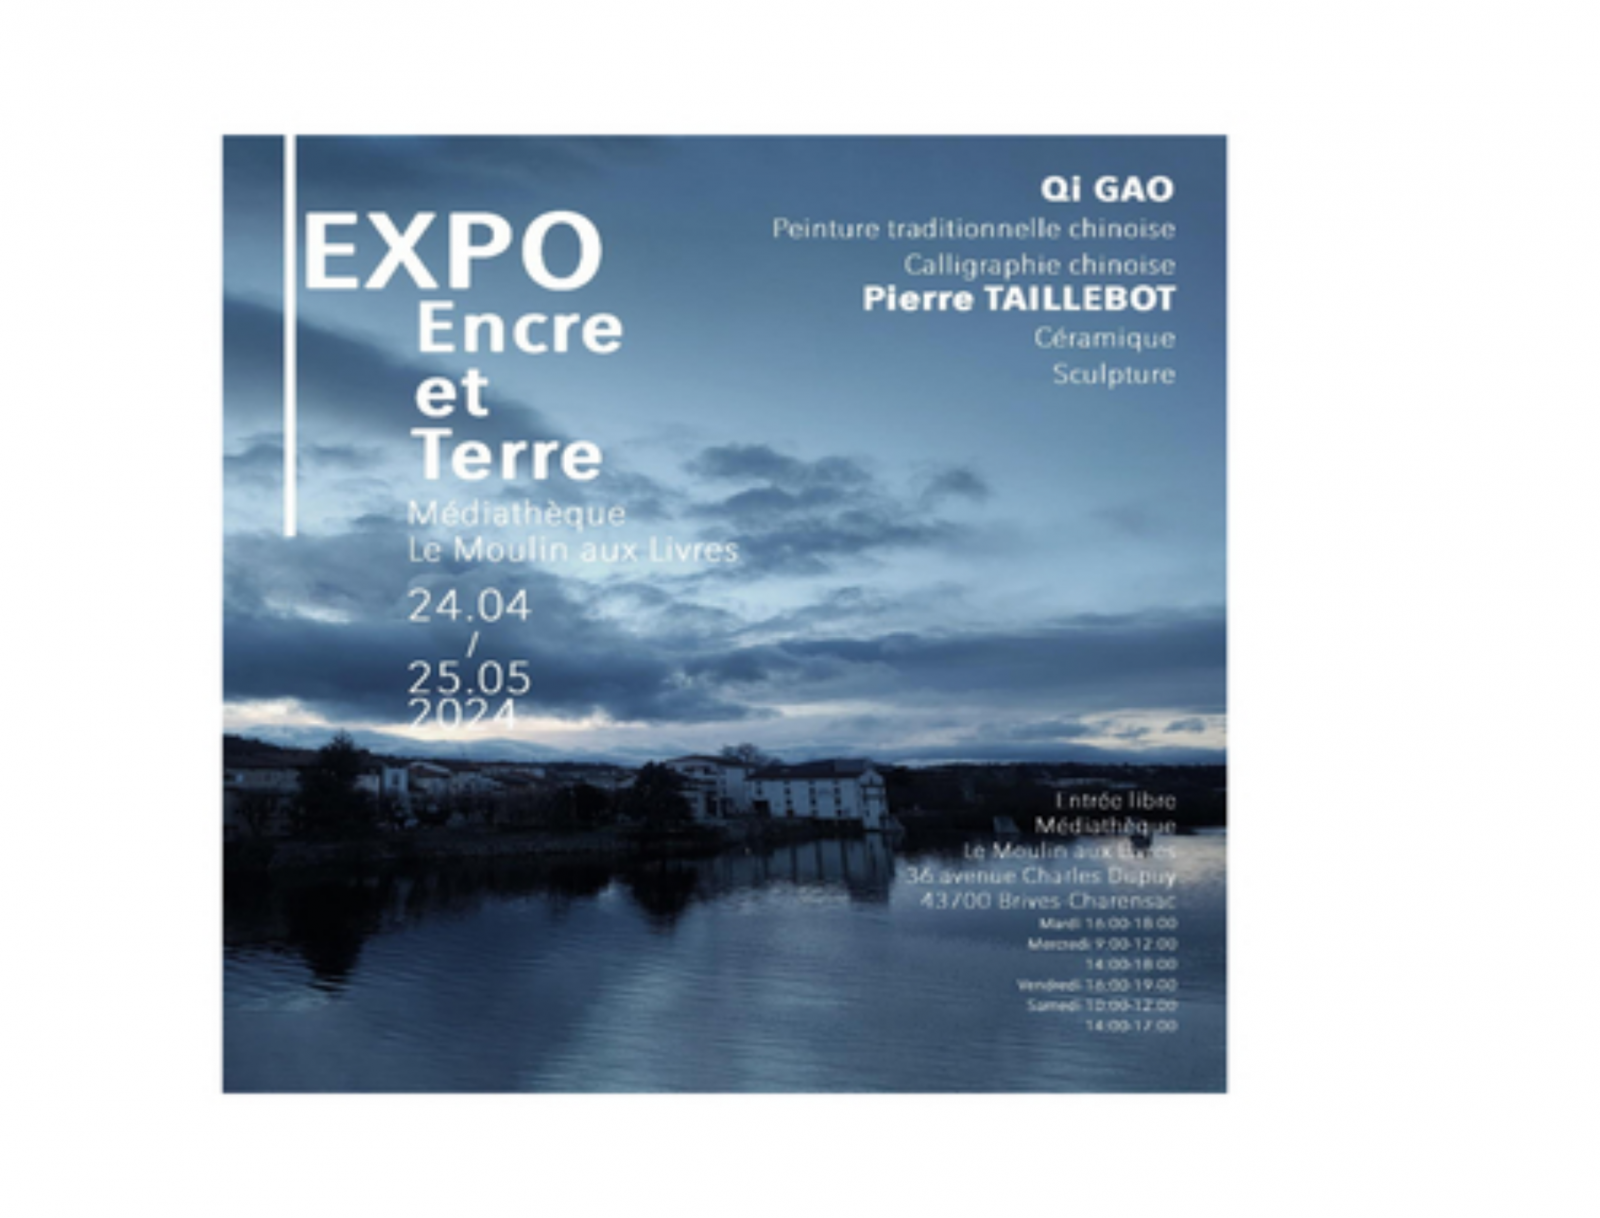 Expo Encre et Terre Qi GAO & Pierre TAILLEBOT